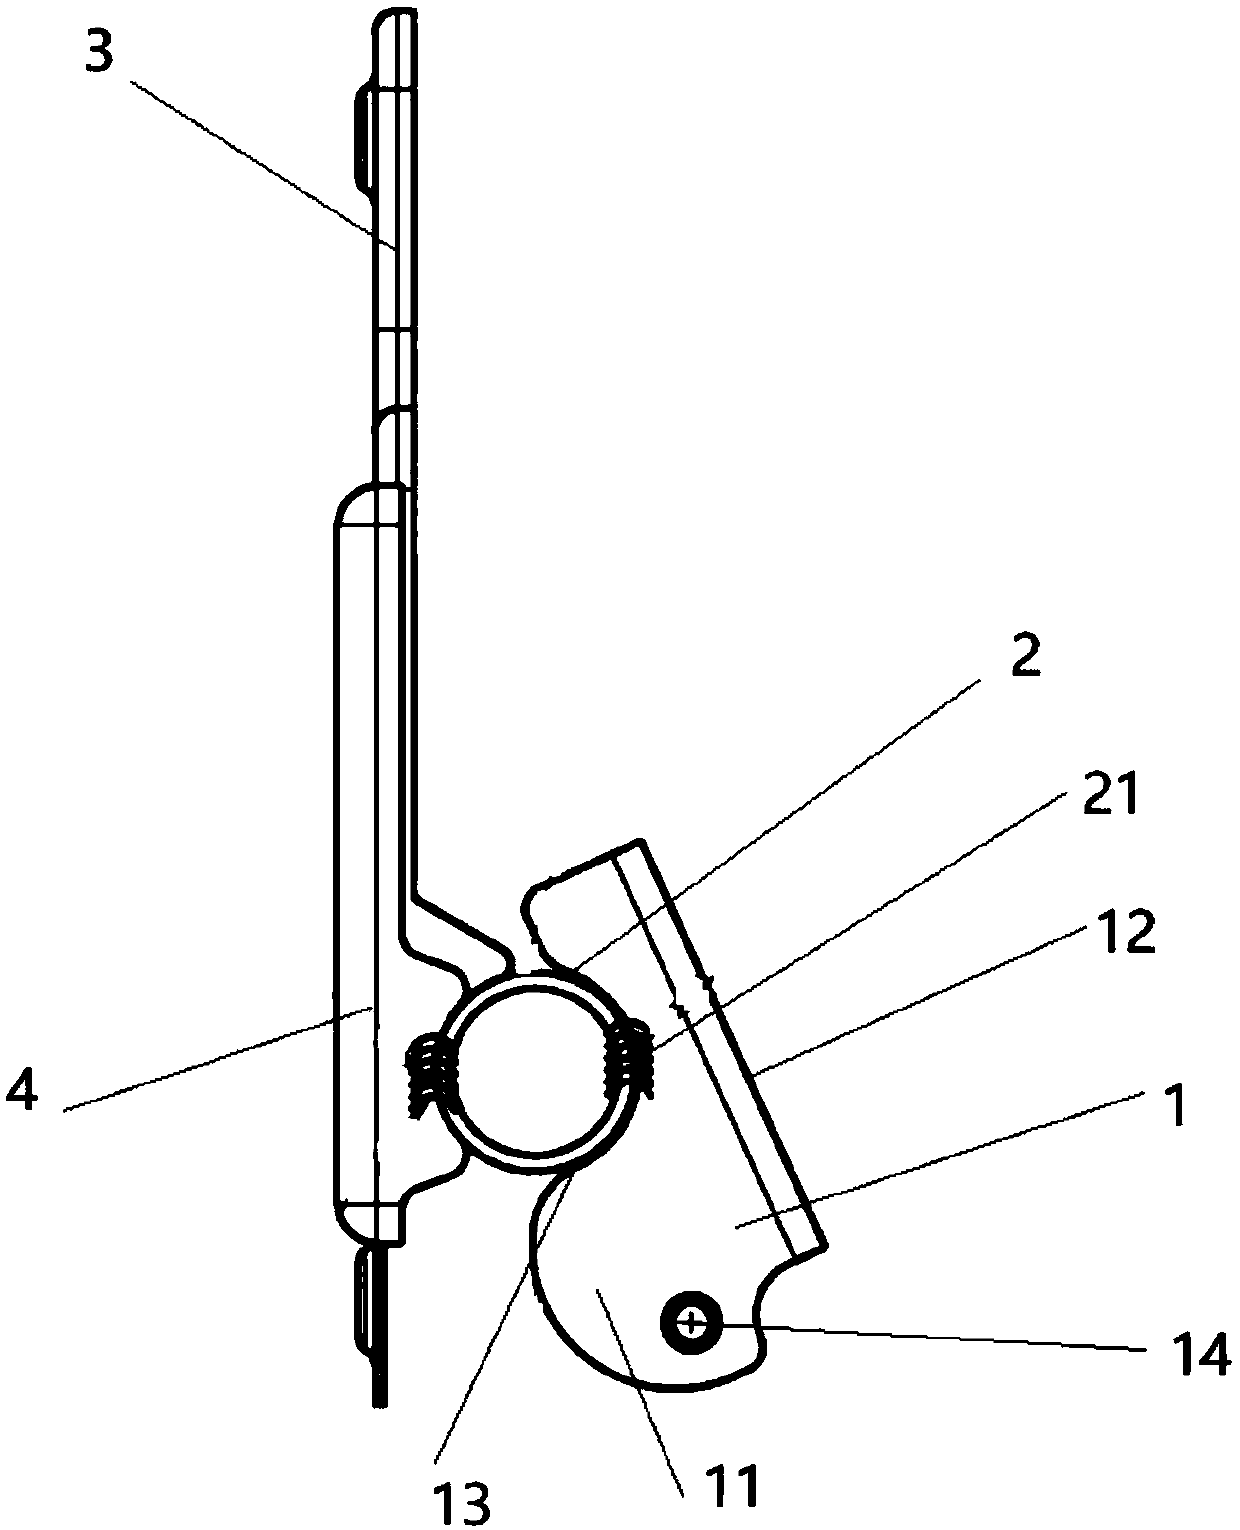 Middle linkage pipe assembly capable of being adjusted according to mounting environment